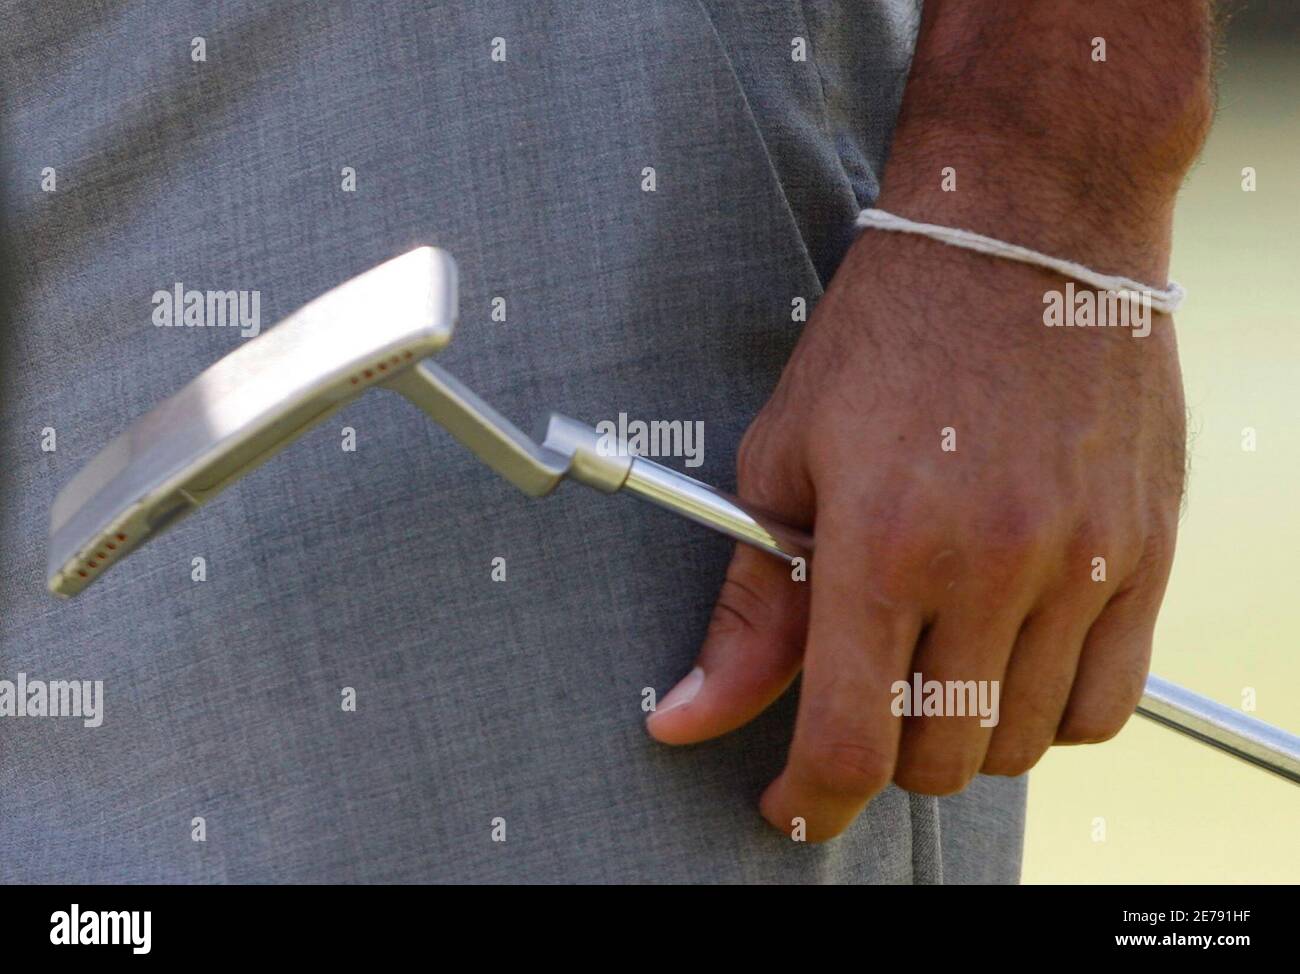 Tiger Woods of the U.S. wears a Buddhist bracelet during his practice round  for the 2010 Masters golf tournament at the Augusta National Golf Club in  Augusta, Georgia, April 6, 2010. REUTERS/Hans